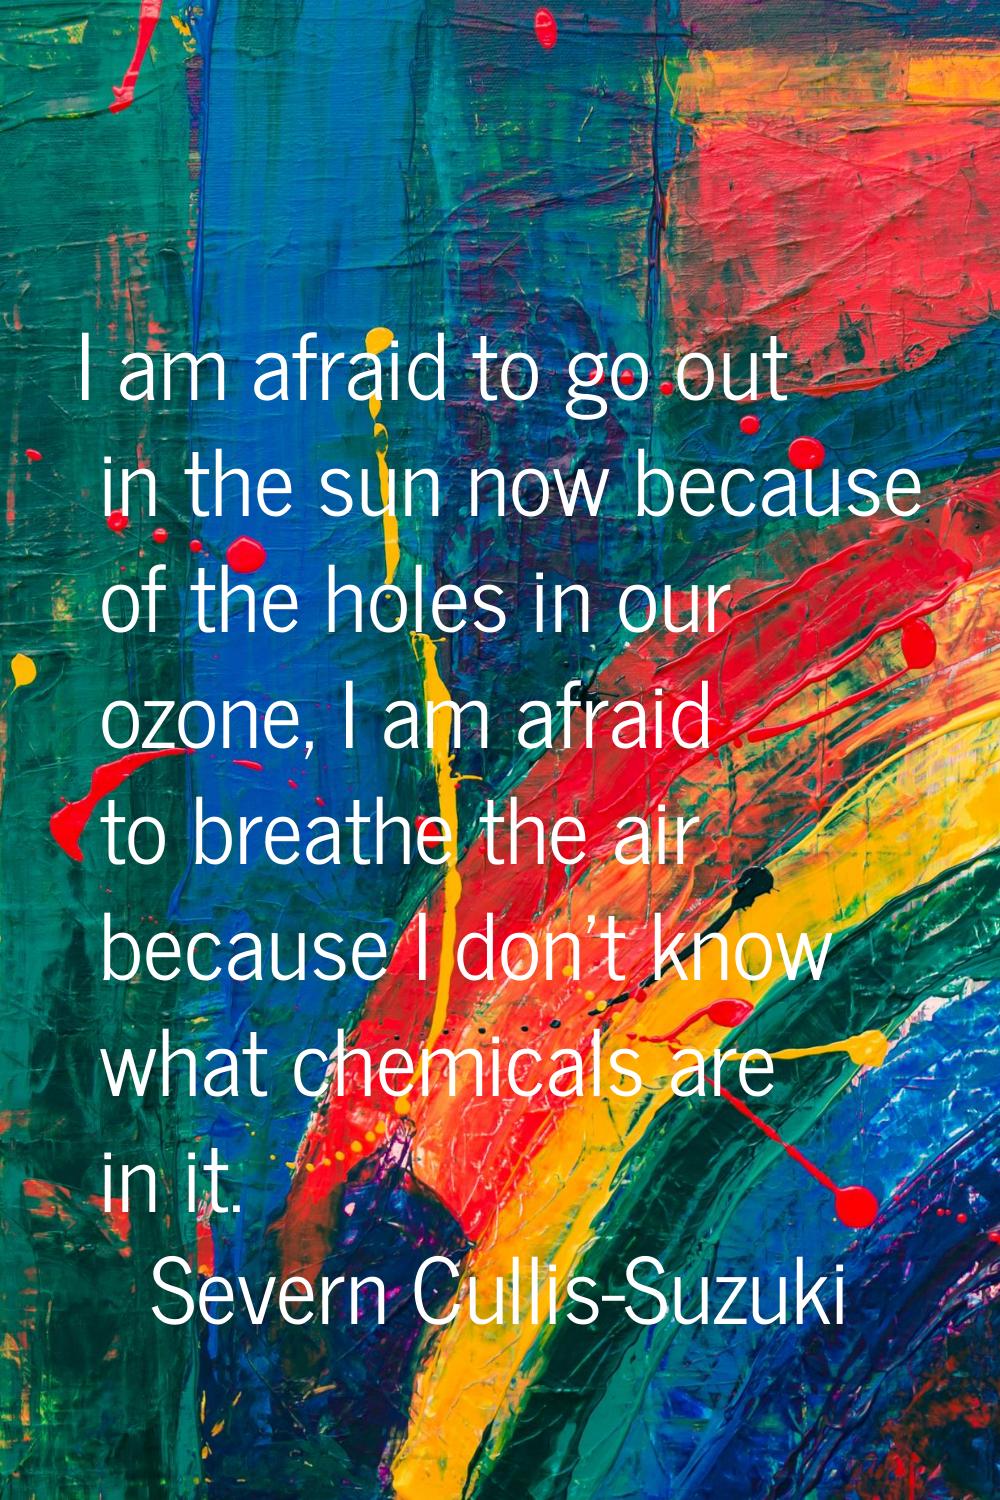 I am afraid to go out in the sun now because of the holes in our ozone, I am afraid to breathe the 